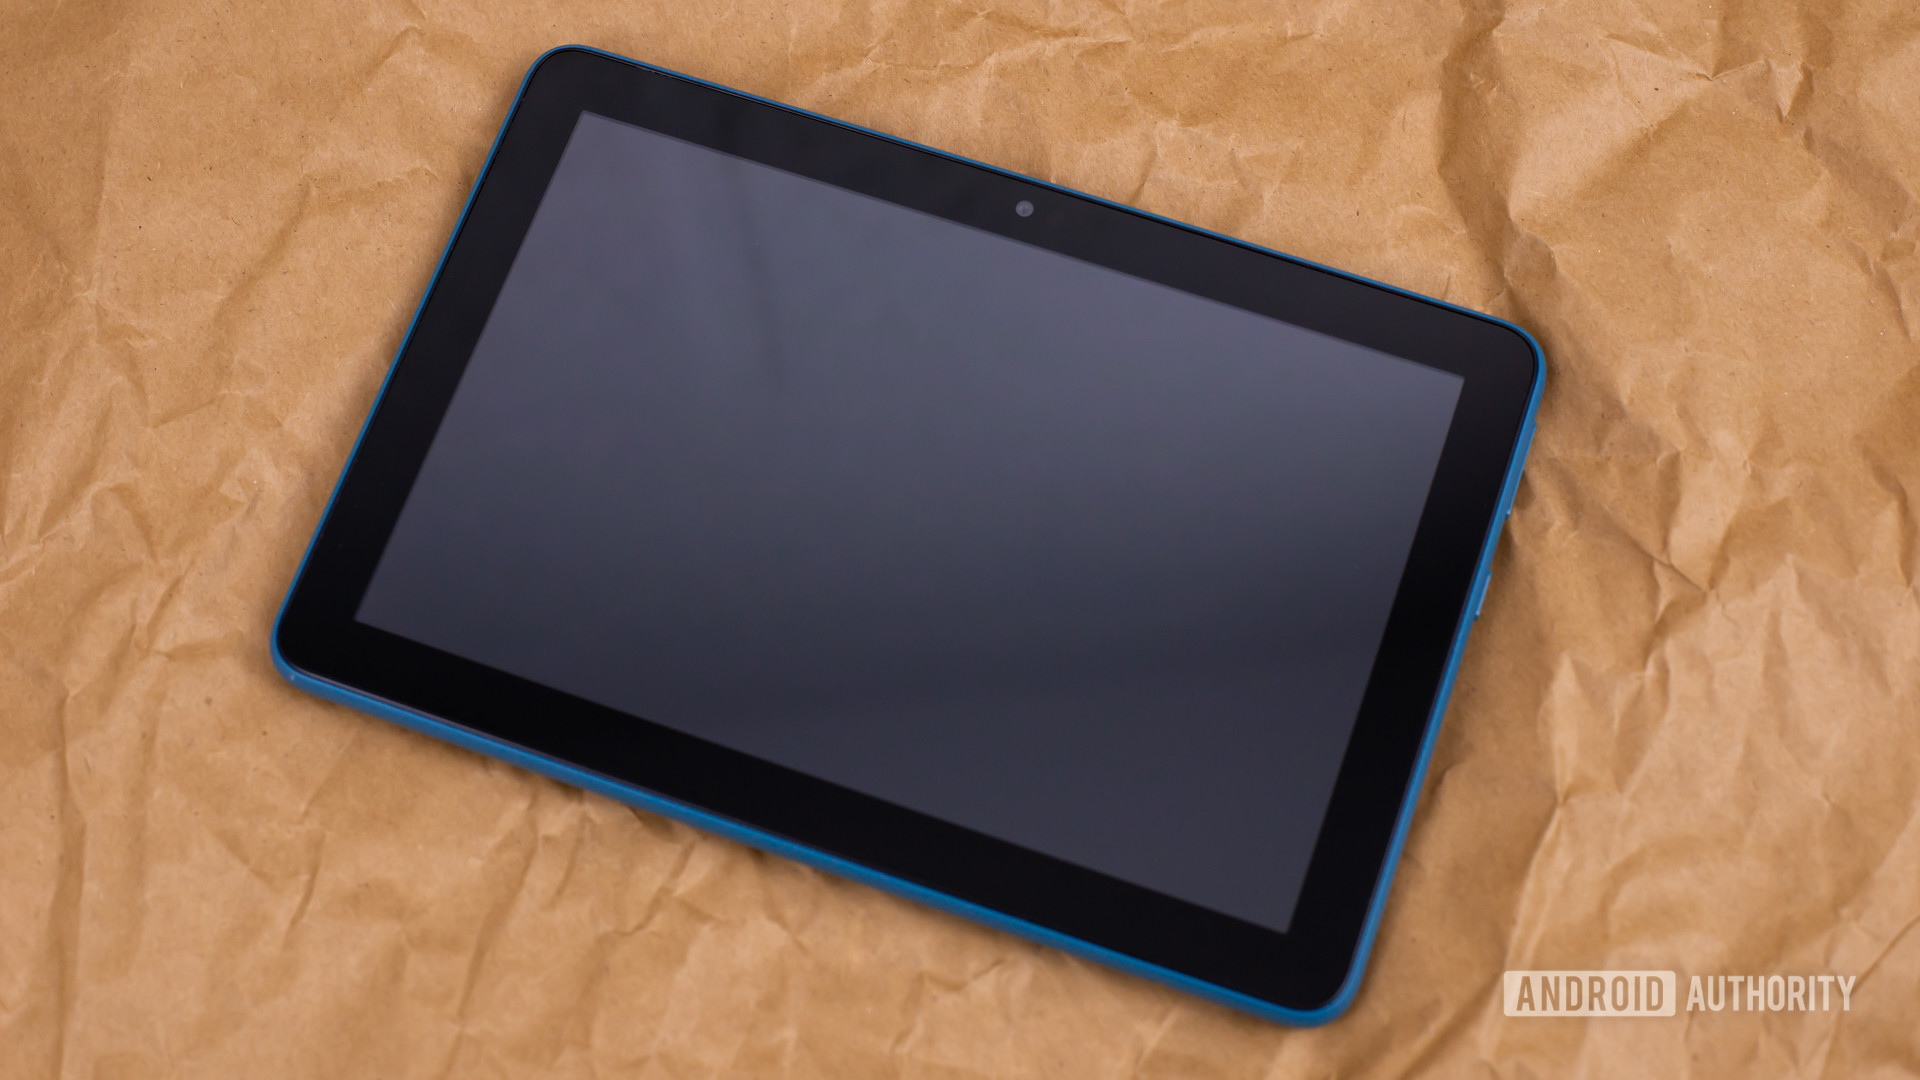 Amazon Fire tablet problems and how to fix them